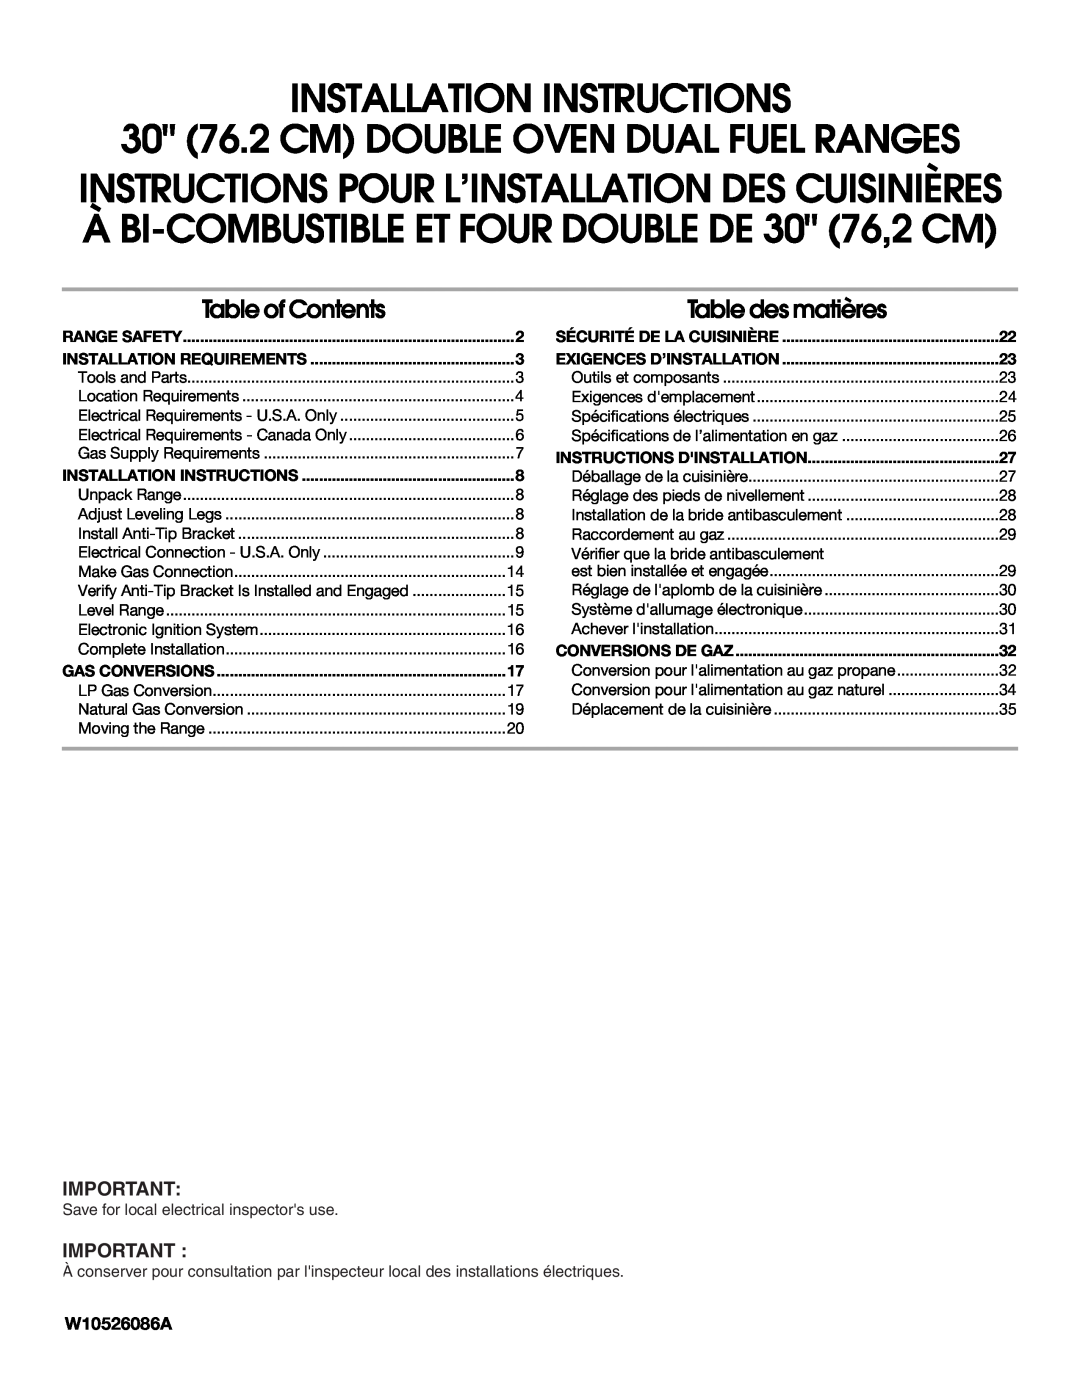 KitchenAid W10526086A installation instructions INSTALLATION INSTRUCTIONS 30 76.2 CM DOUBLE OVEN DUAL FUEL RANGES 